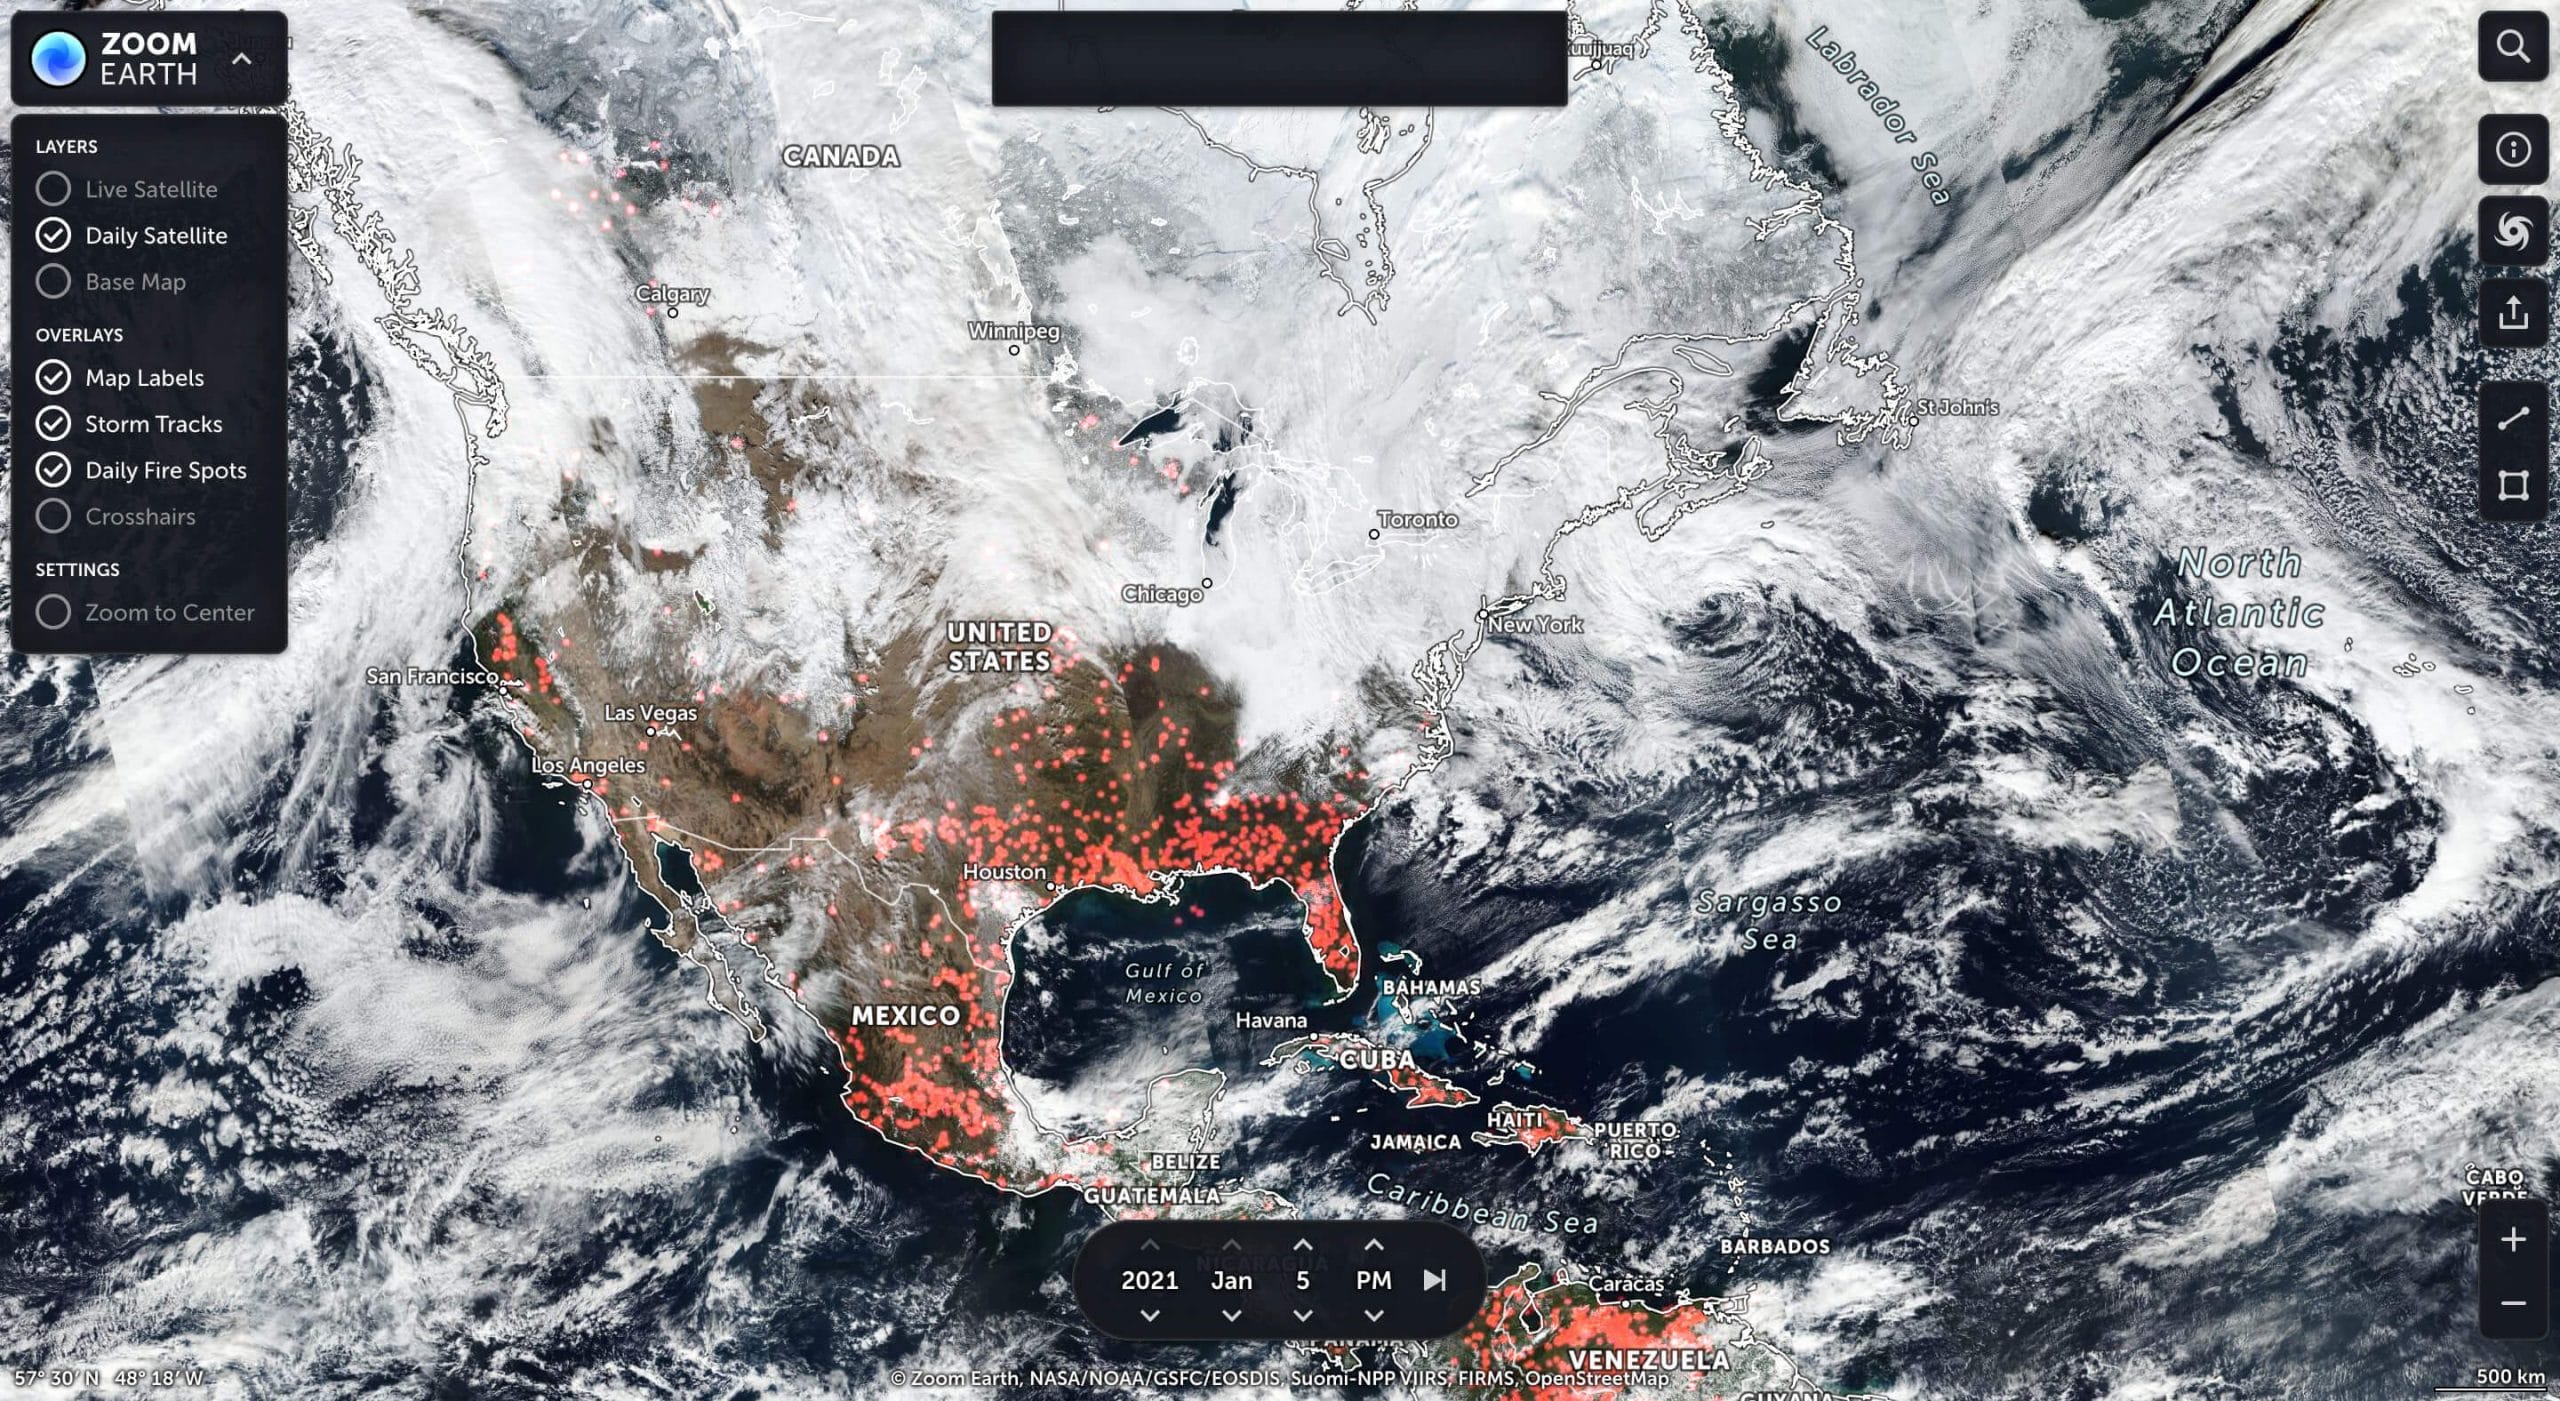 Free Satellite Imagery Data Providers & Sources For All Needs